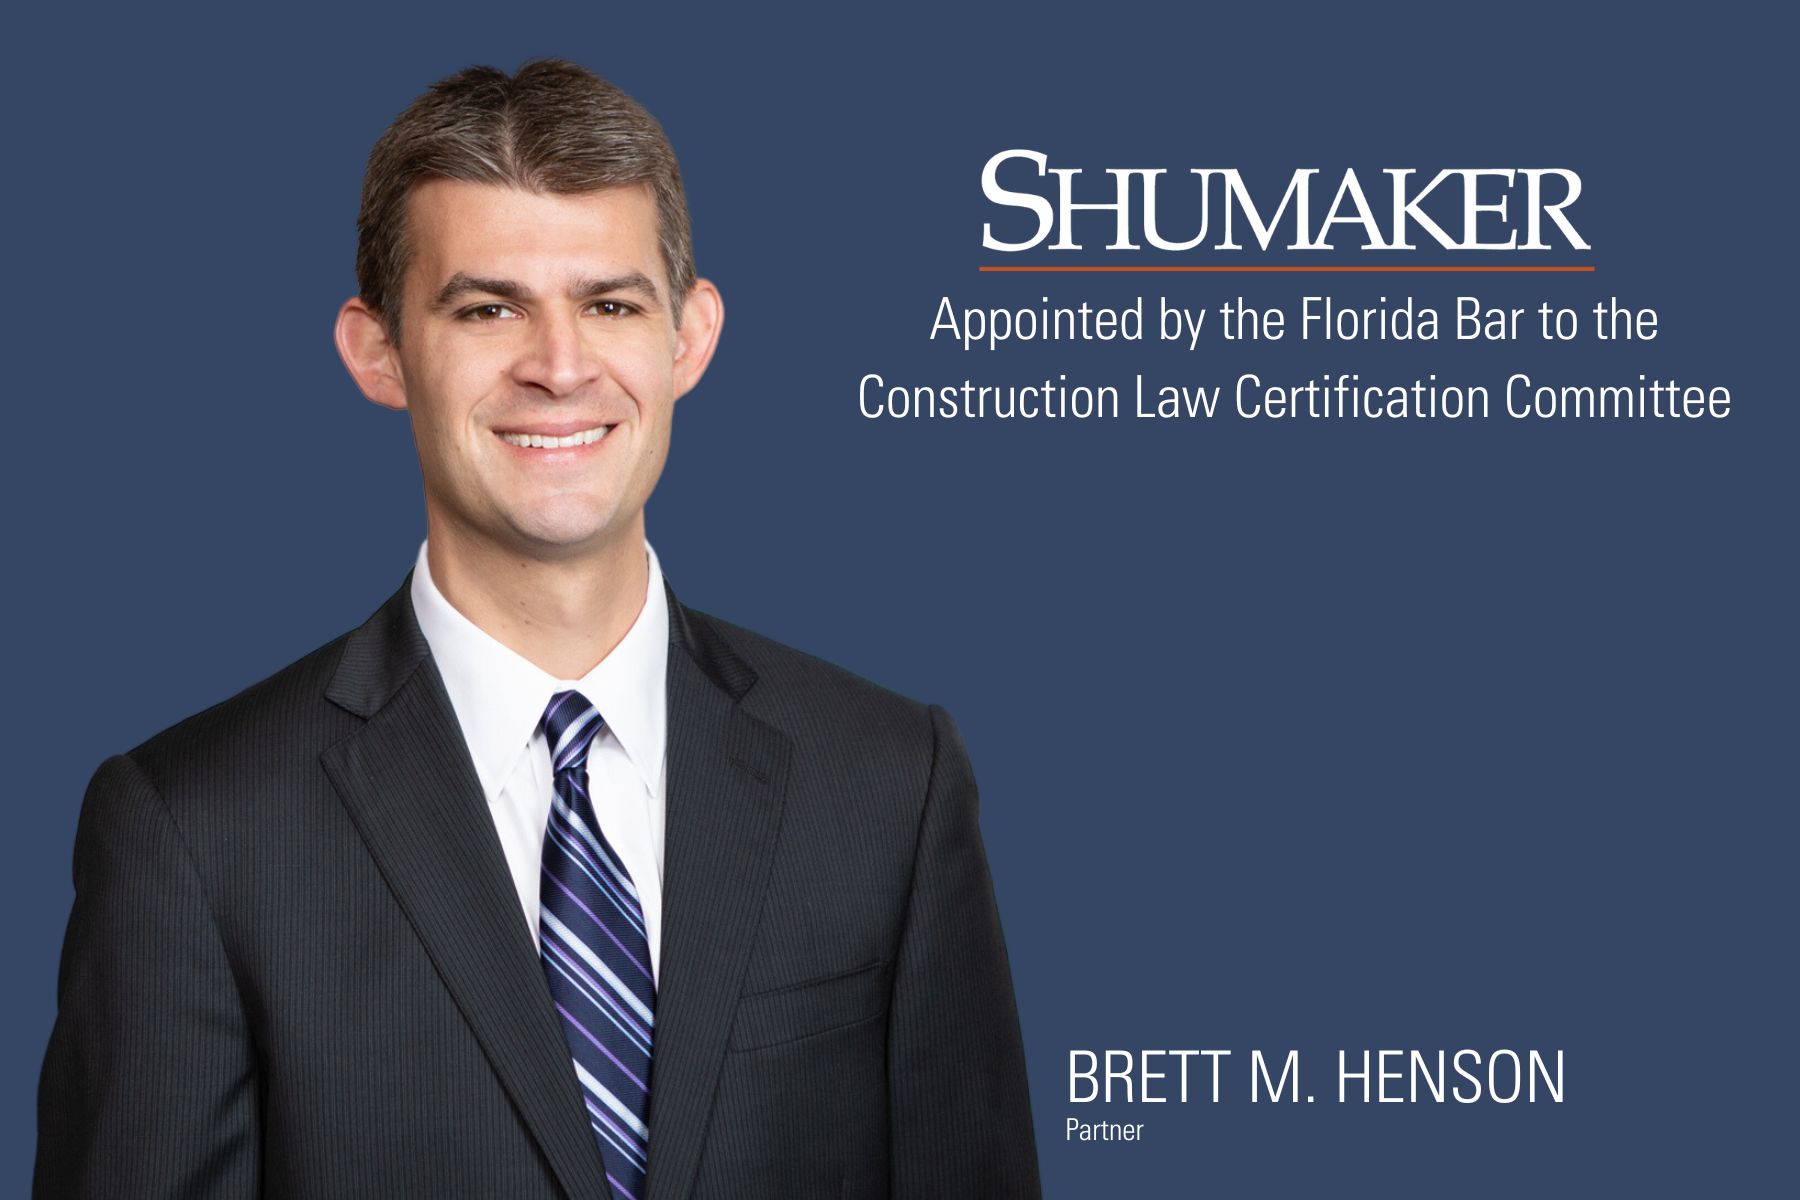 Florida Bar Appoints Shumaker’s Brett M. Henson to Construction Law Certification Committee